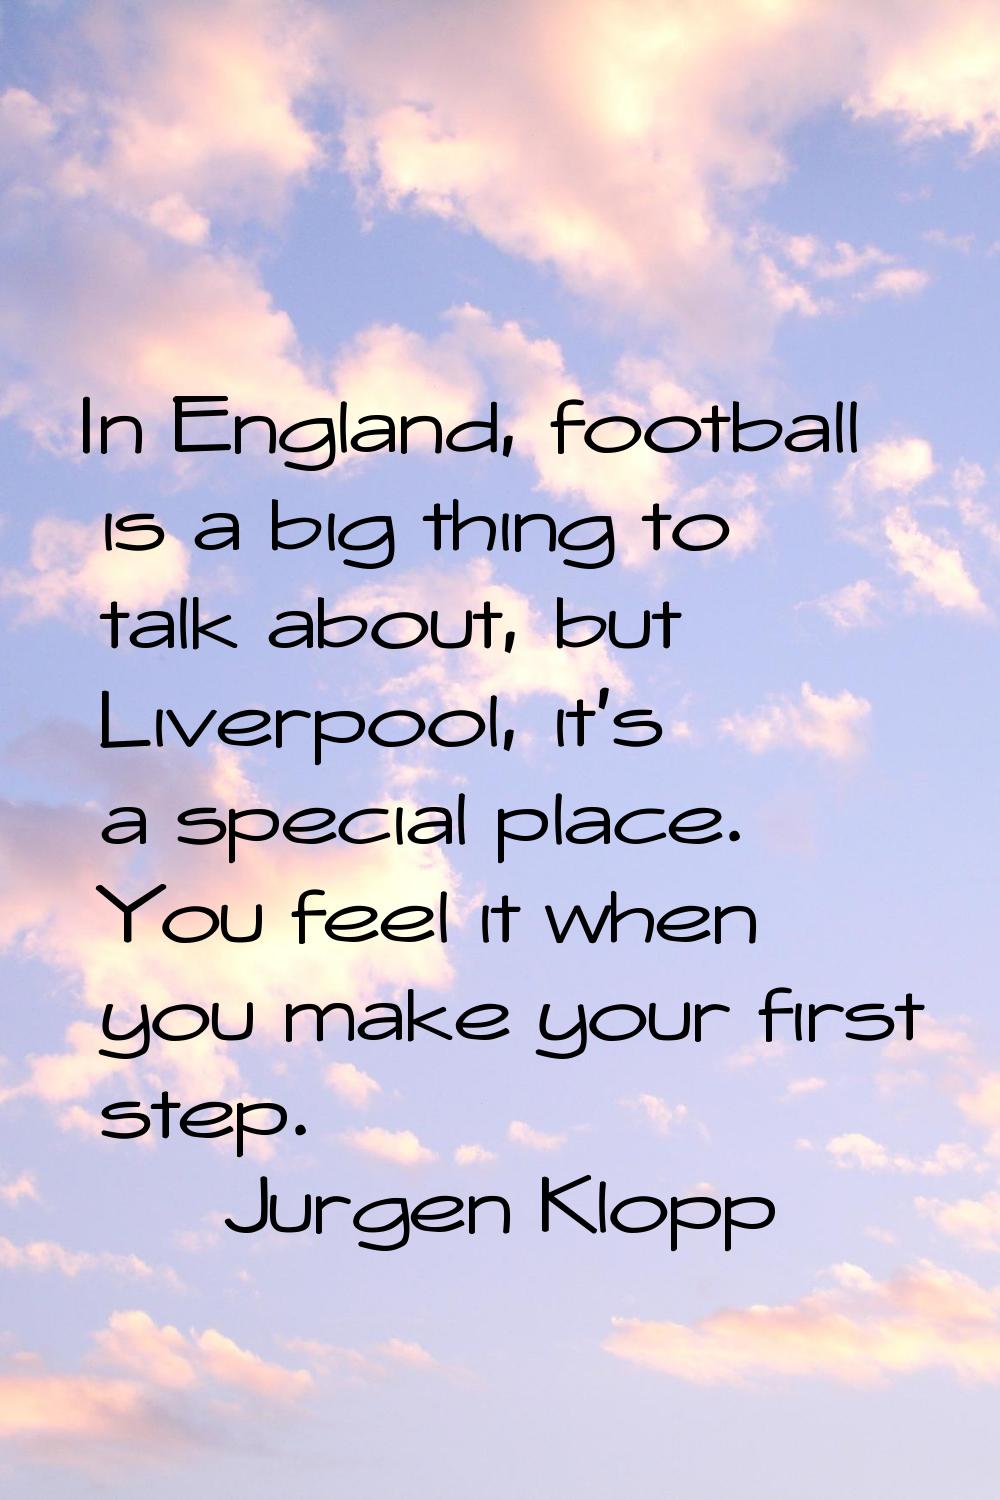 In England, football is a big thing to talk about, but Liverpool, it's a special place. You feel it